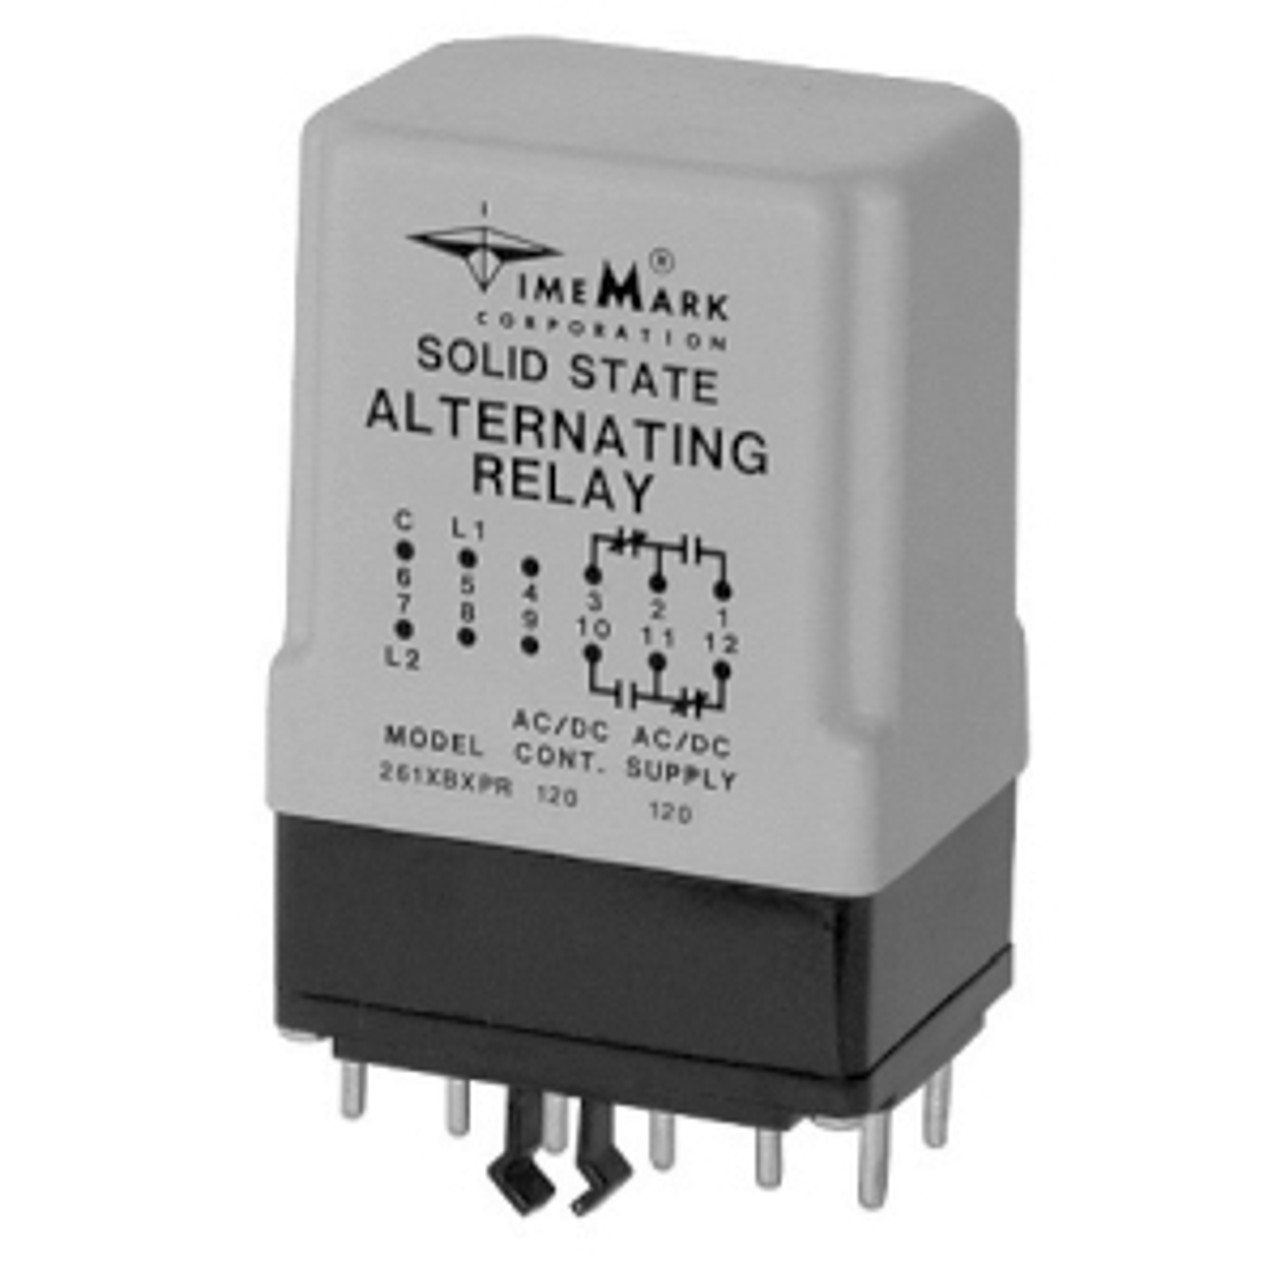 TimeMark 261XBXP-24 Alternating Sequencing Relay